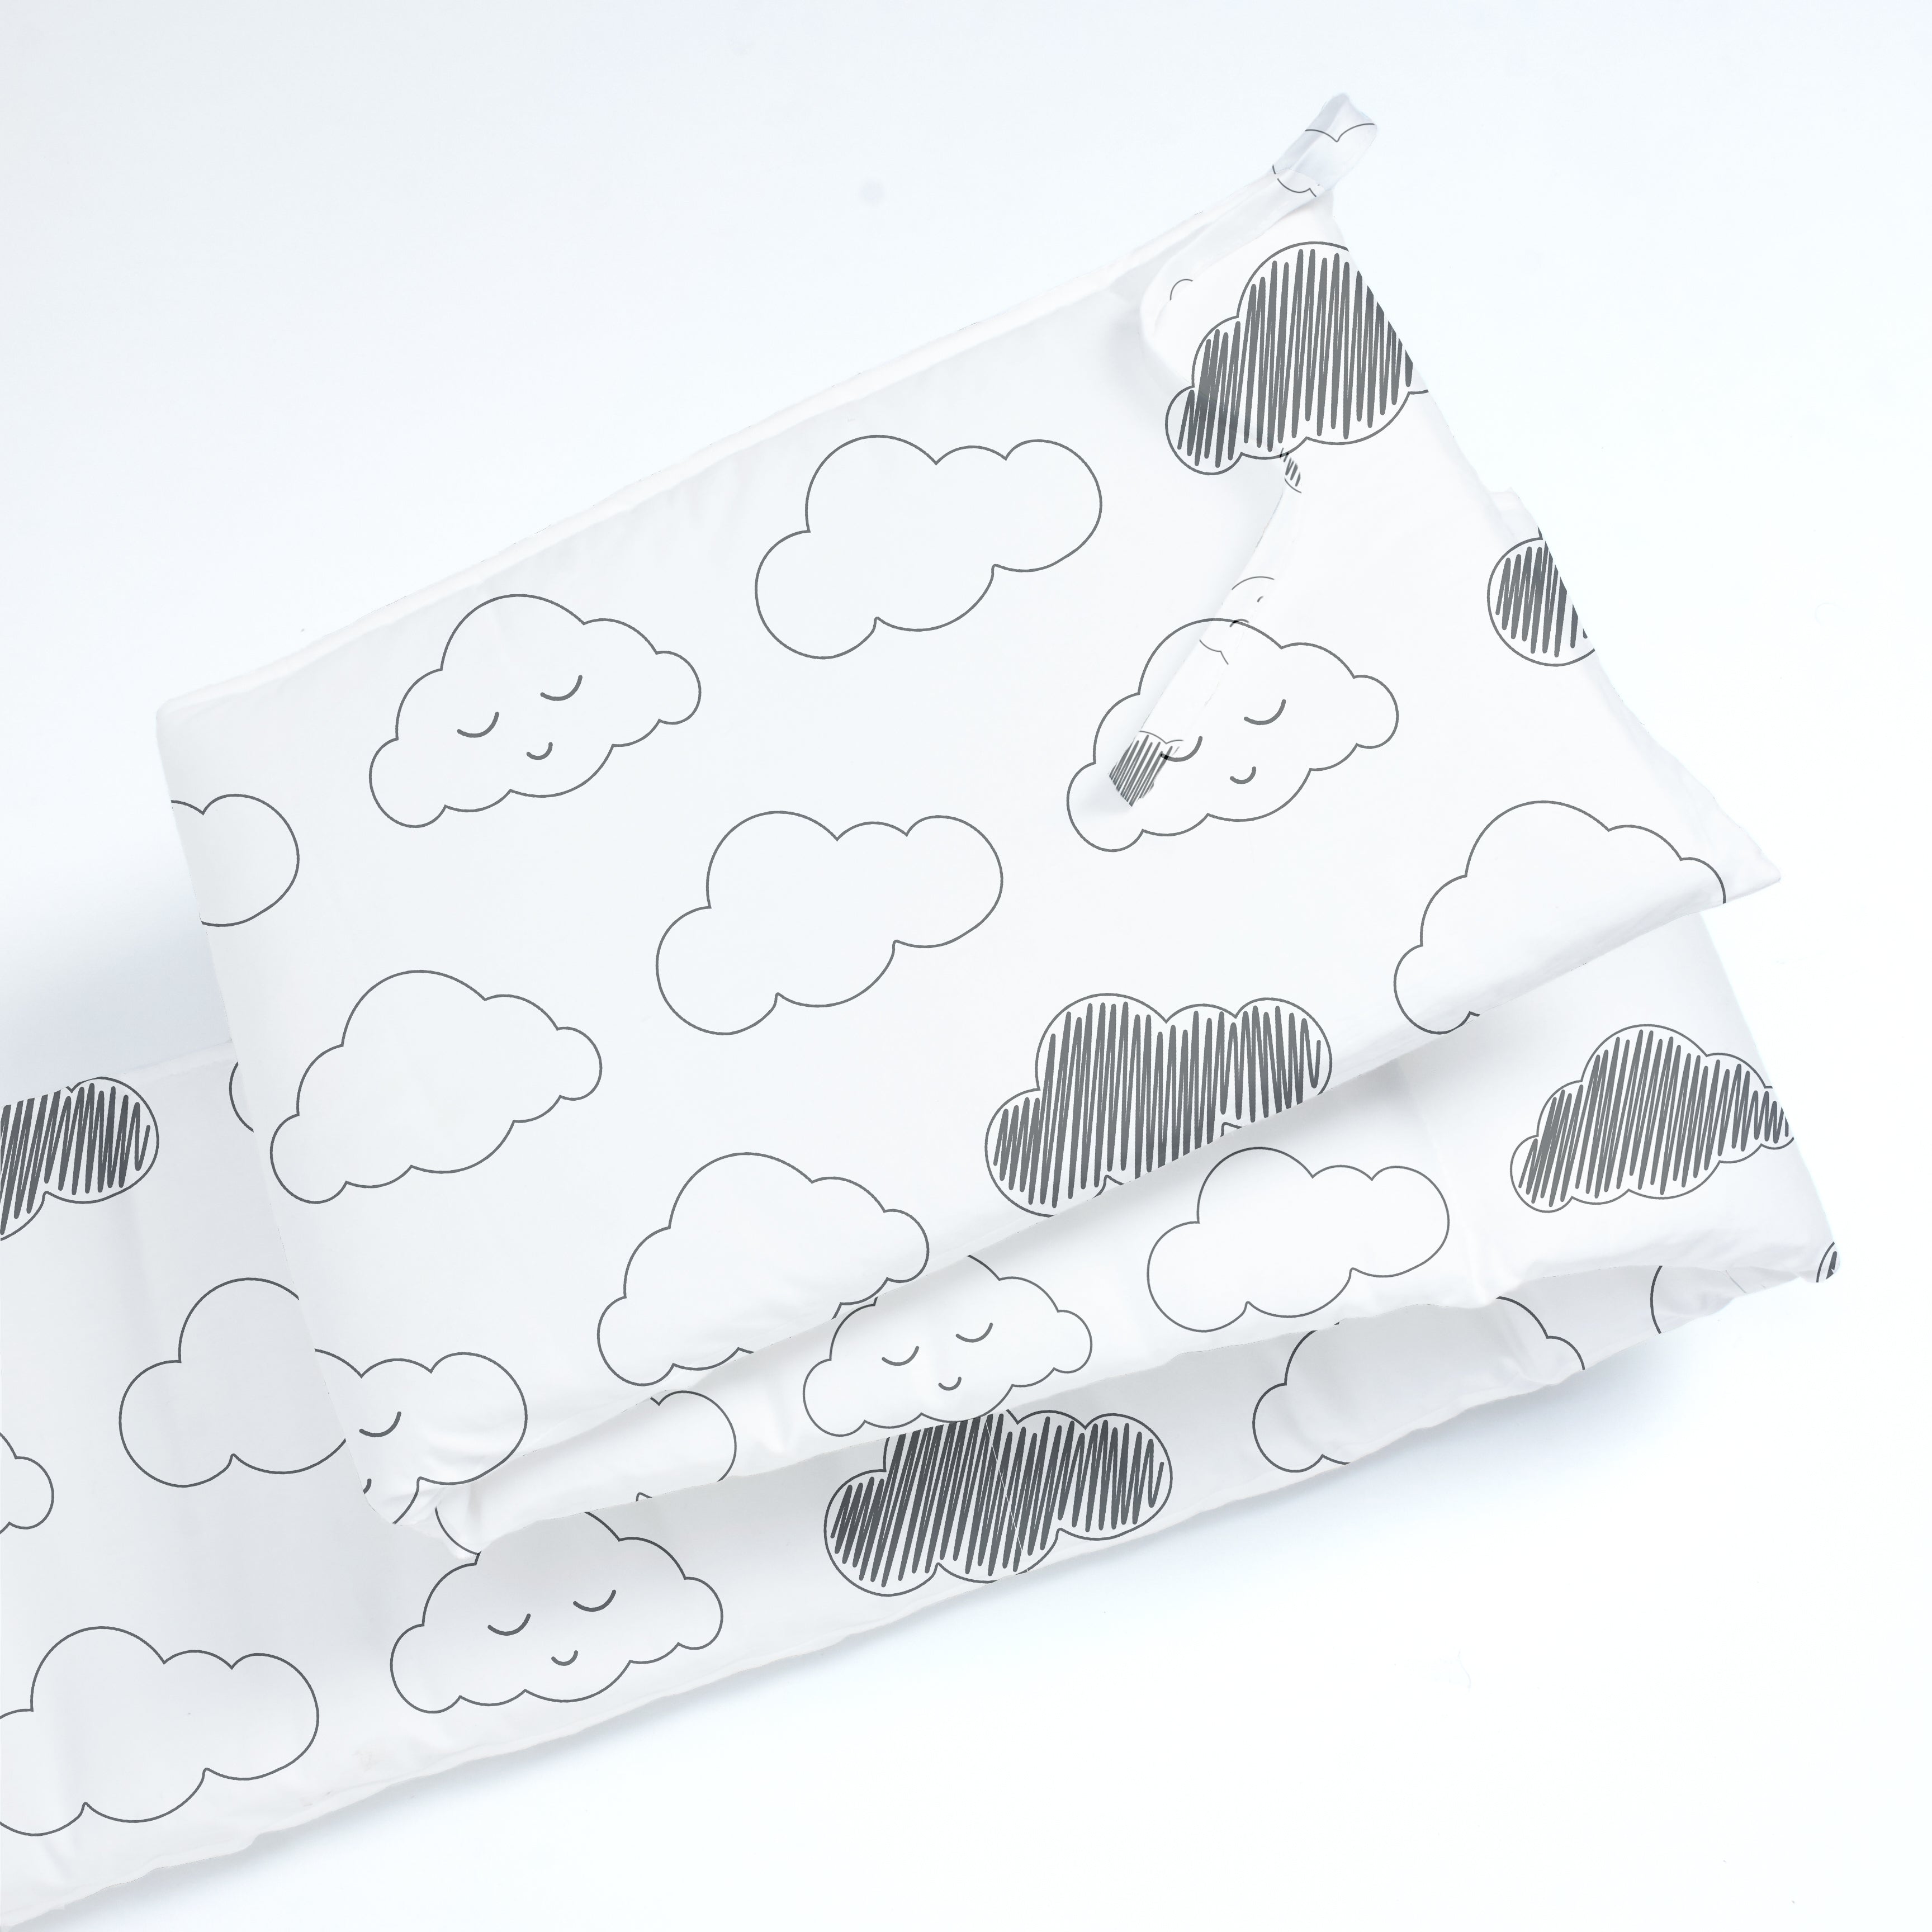 The White Cradle Baby Safe Cot Bumper Pad, Fits all Standard Cribs, Thick Padded Protective Liner for Child Nursery Bed, Soft Organic Cotton Fabric, Breathable, Non-Allergenic - Grey Clouds